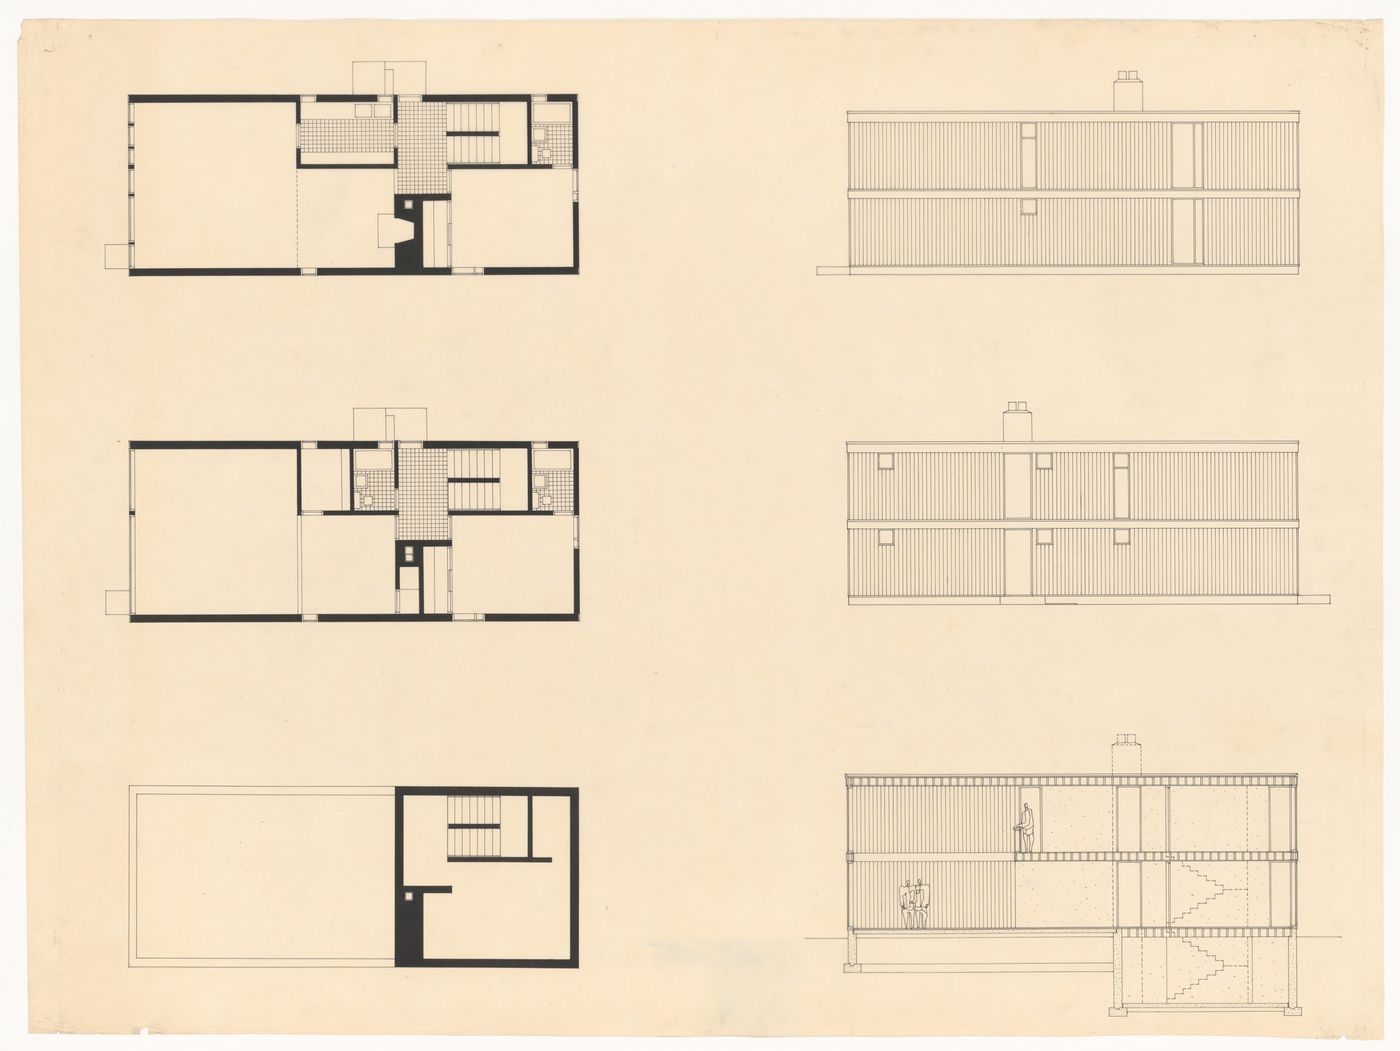 Plans, elevations, and section for Ithaca House